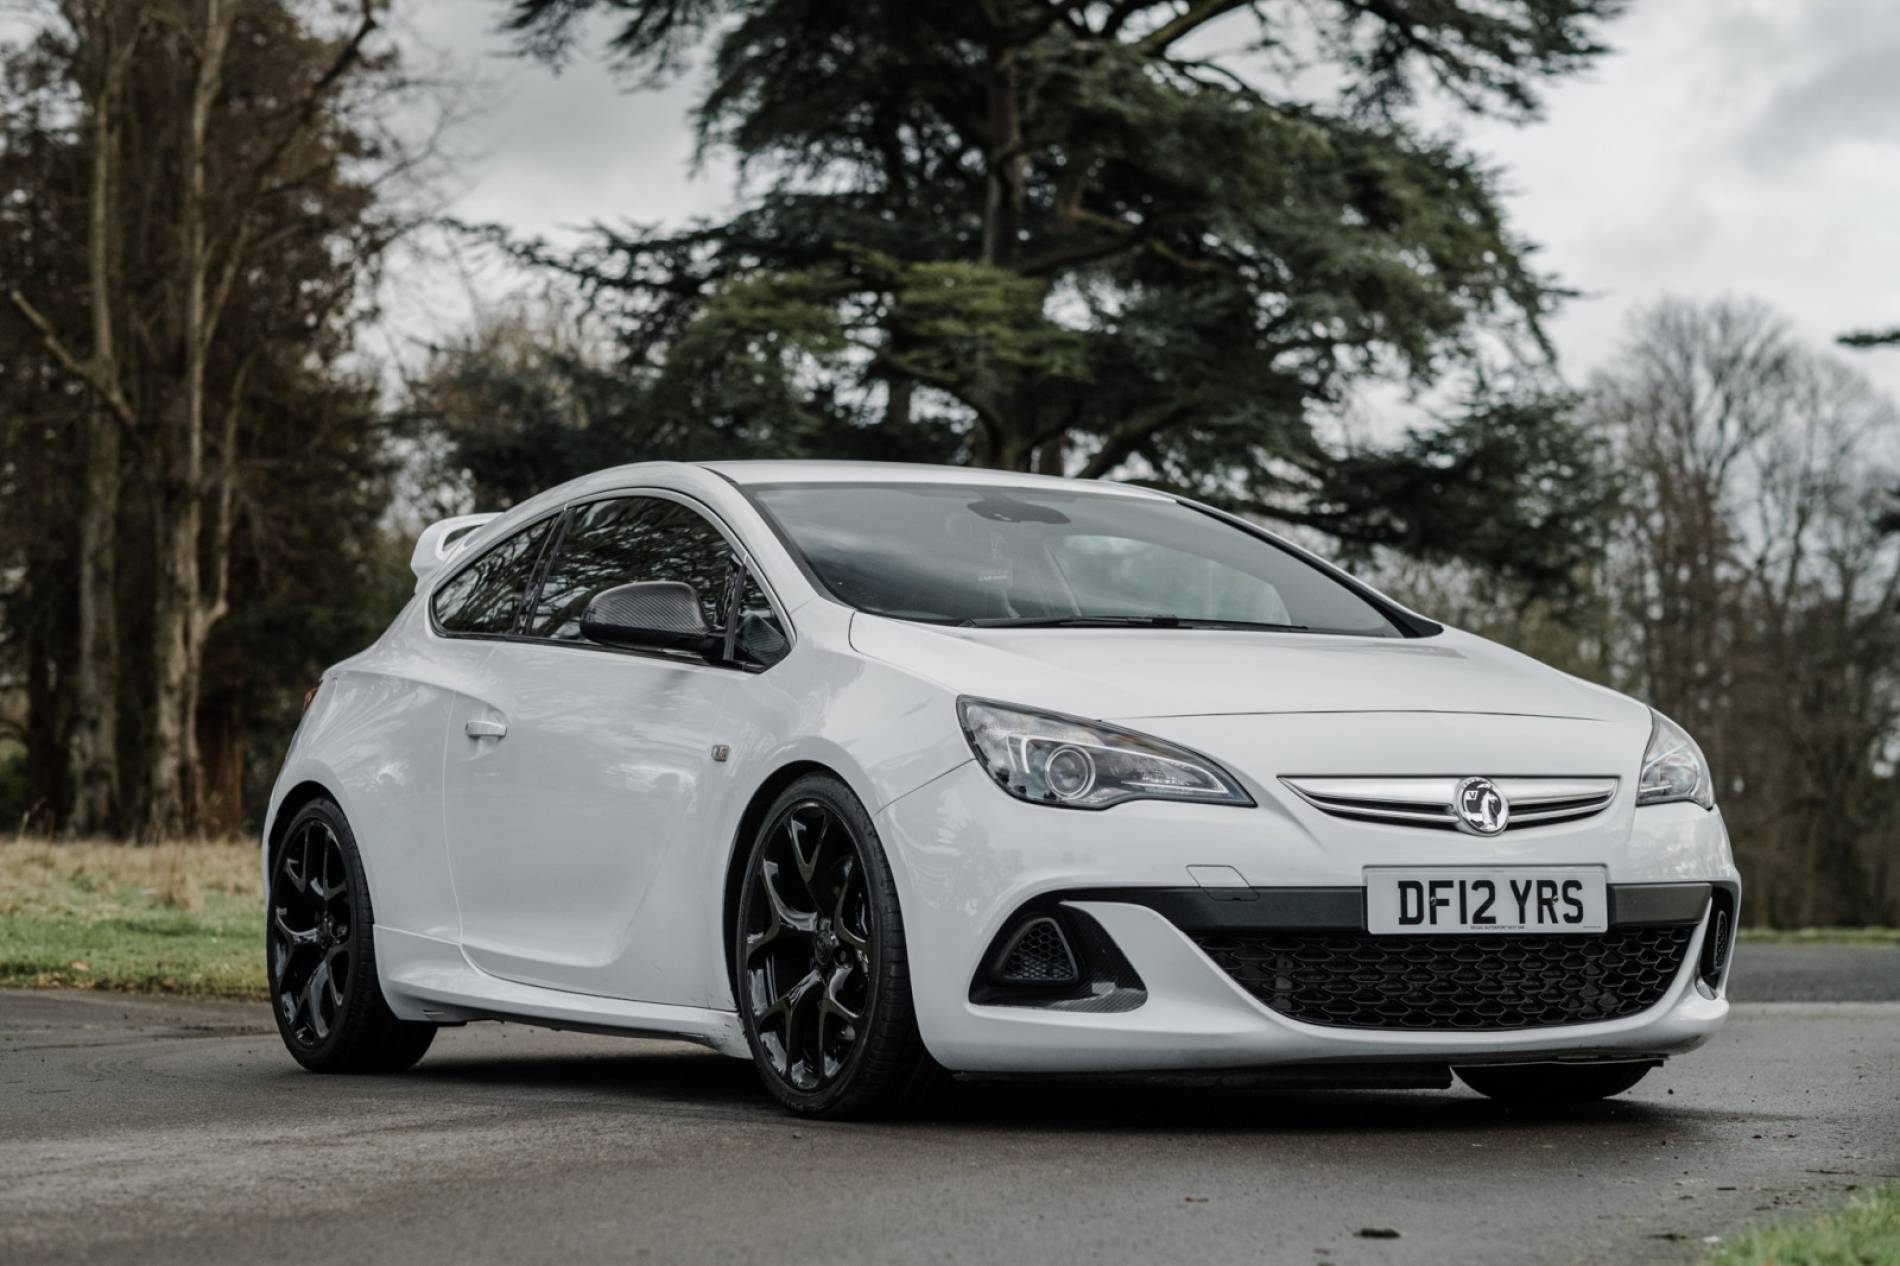 Vauxhall Astra VXR RSS Forged 440HP